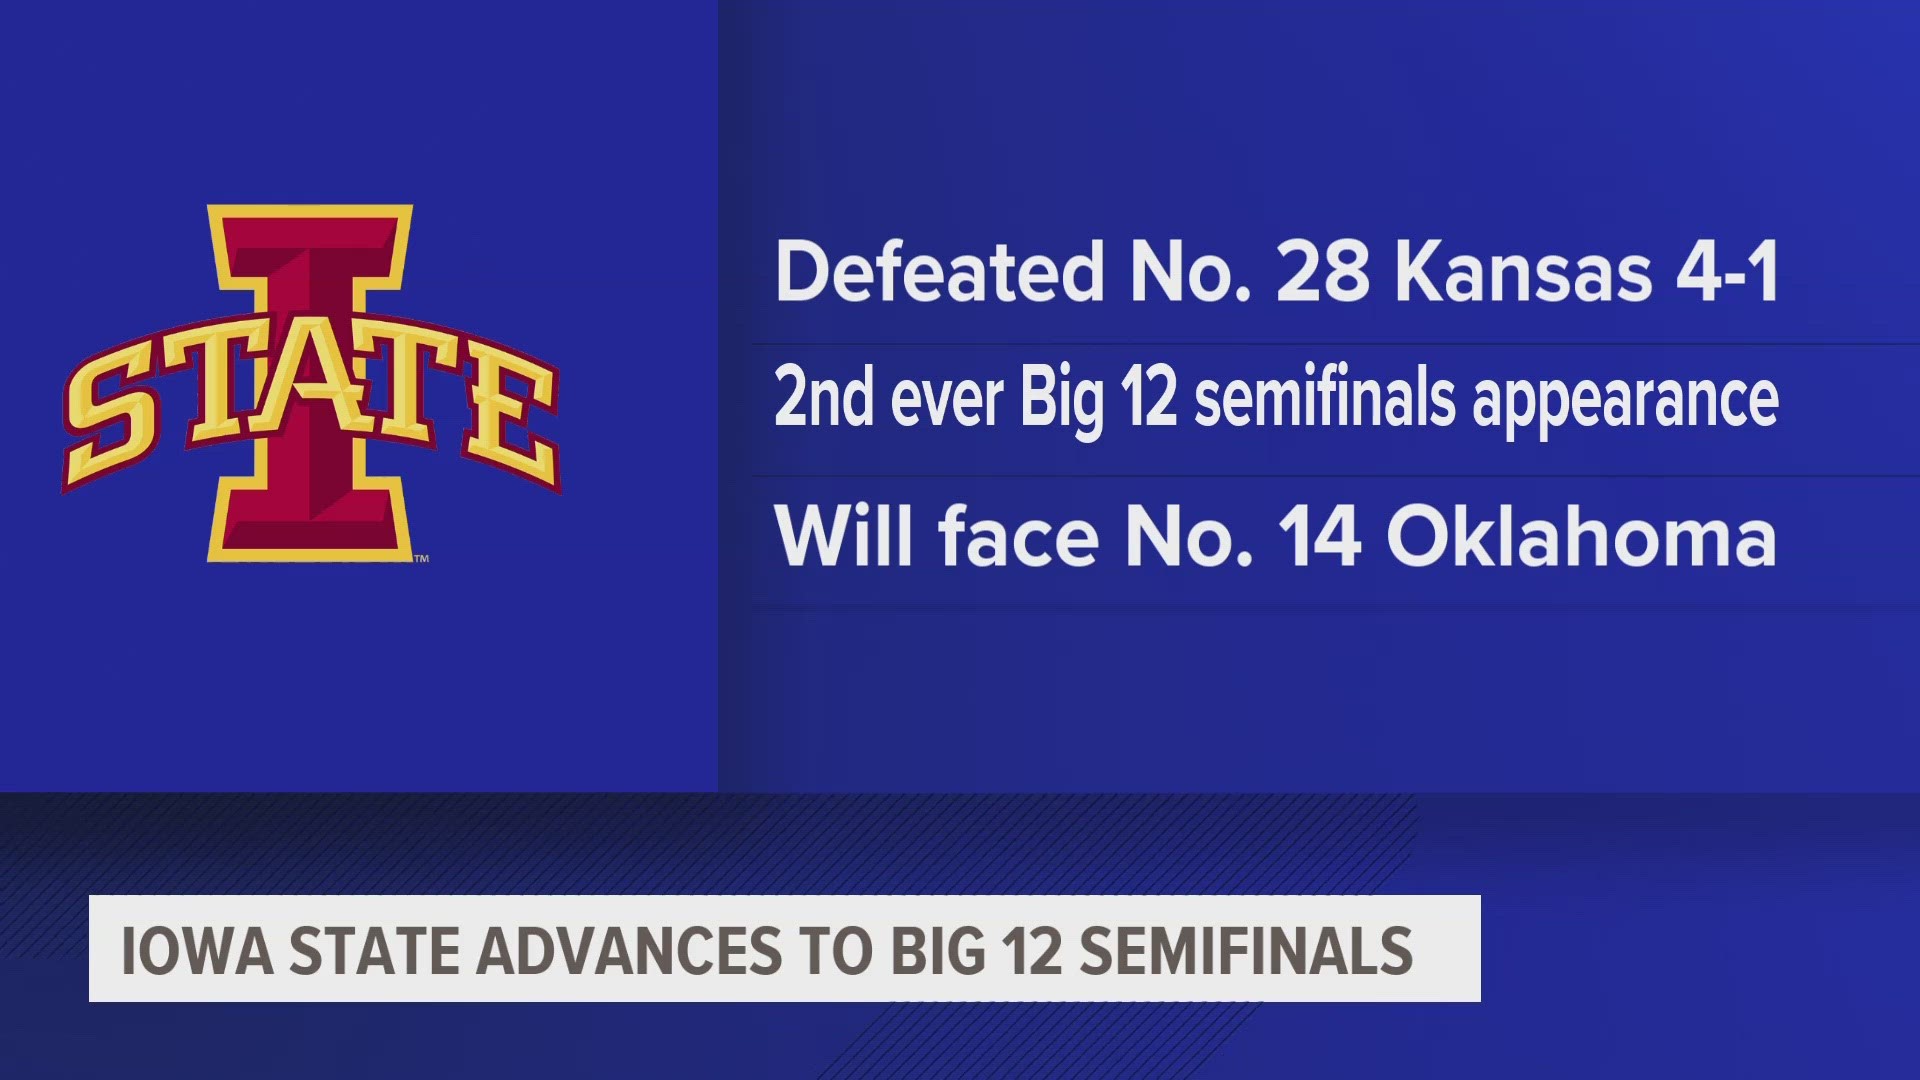 The Cyclones beat Kansas 4-1 to advance to the Big 12 semifinals. This is just the second time they've reached the semifinals in program history.